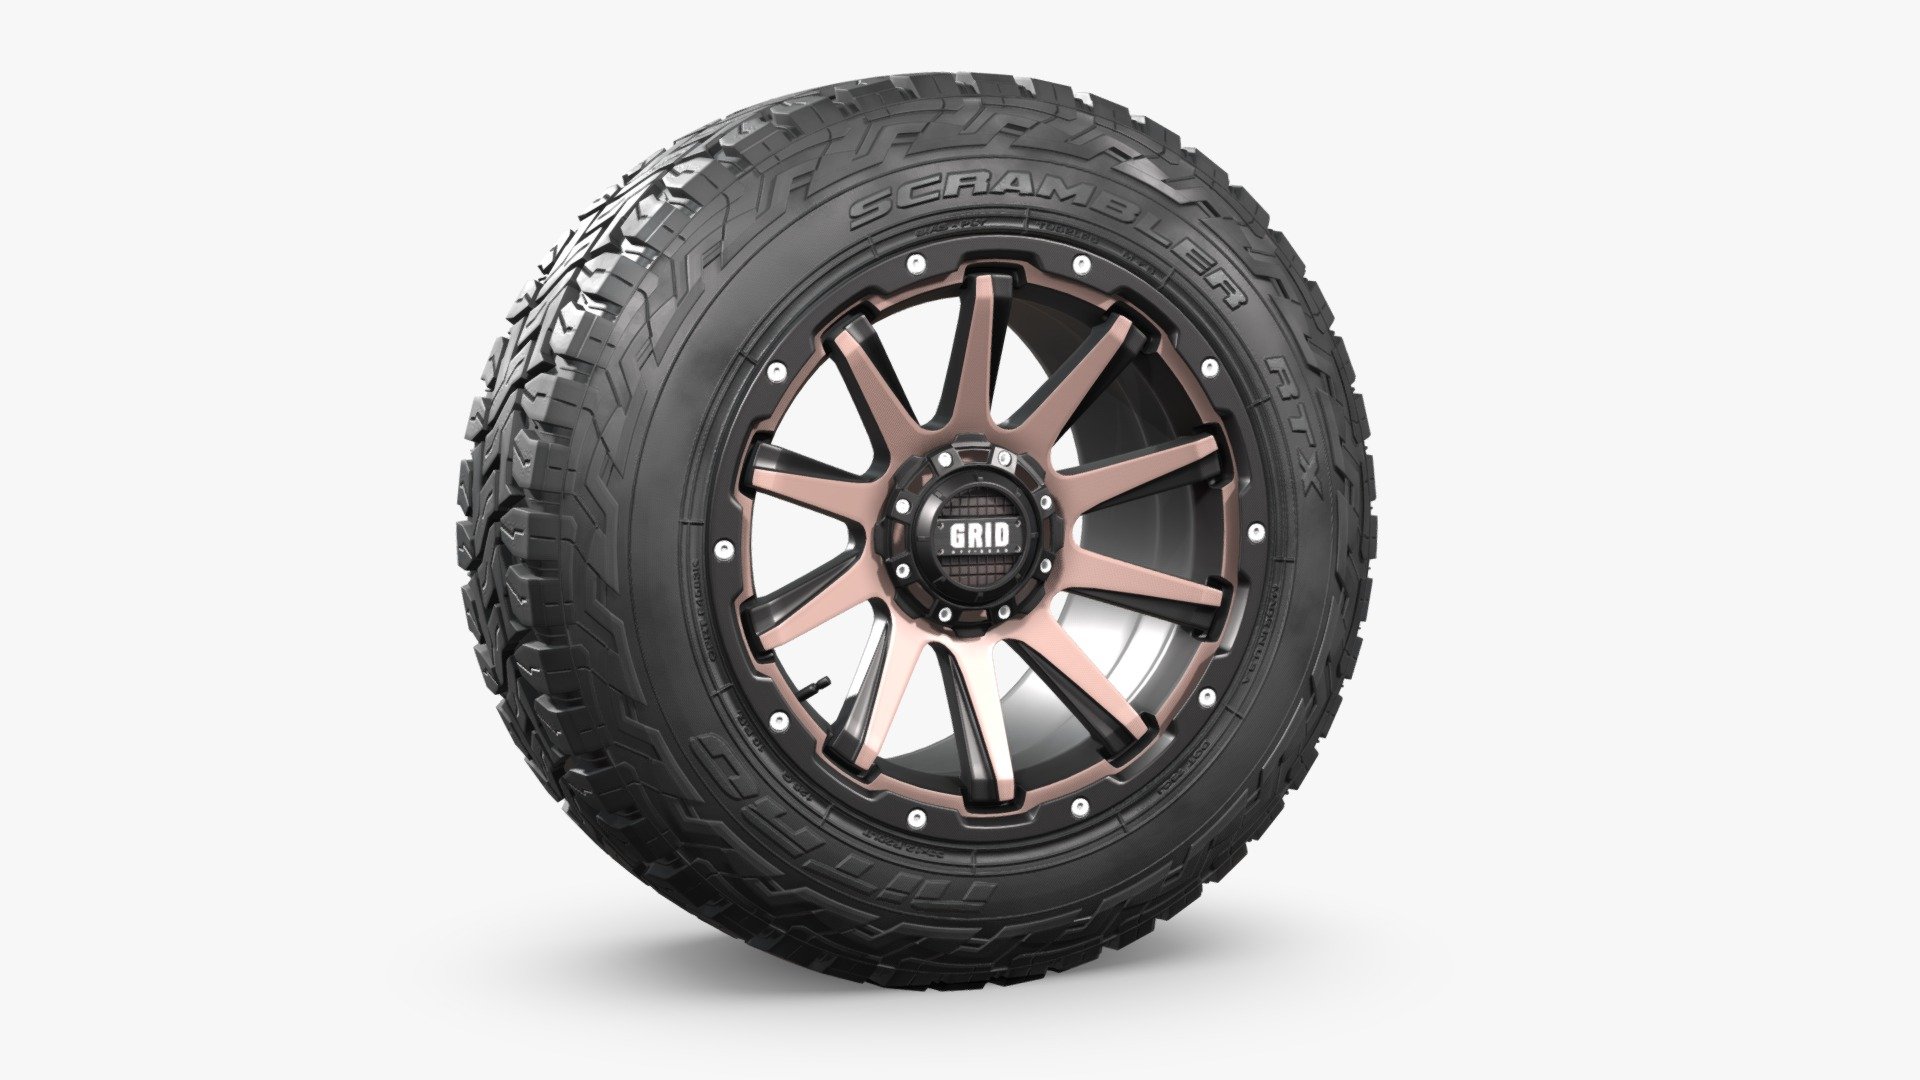 https://sketchfab.com/nnavas3d

3D model of an off road wheel and tire combo.

The model is fully textured and was created with 3DS Max 2016 using the open subdivision modifier which has been left in the stack to adjust the level of detail.

The model has 33.800 polygons with subdivision level at 0 and 134.800 at level 1.

Elements are logically named and grouped so they can be separated to adjust to your needs.

The model contains quads and tris (no N-gons).

Scale/transform is set to 100%, units are set to centimeters, texture paths are stripped and and it is made to real world scale.

FBX, OBJ and 3DS files have been included in separated HI and LO subdivision versions.

Renders were made in 3DSMax with V Ray and have no post processing.

All textures are included and mapped in all files but they will render like the preview images only in 3DSMax with V-Ray, the rest of the files might have to be adjusted depending on the software you are using.

JPG textures have 2048 x 2048 resolution 3d model